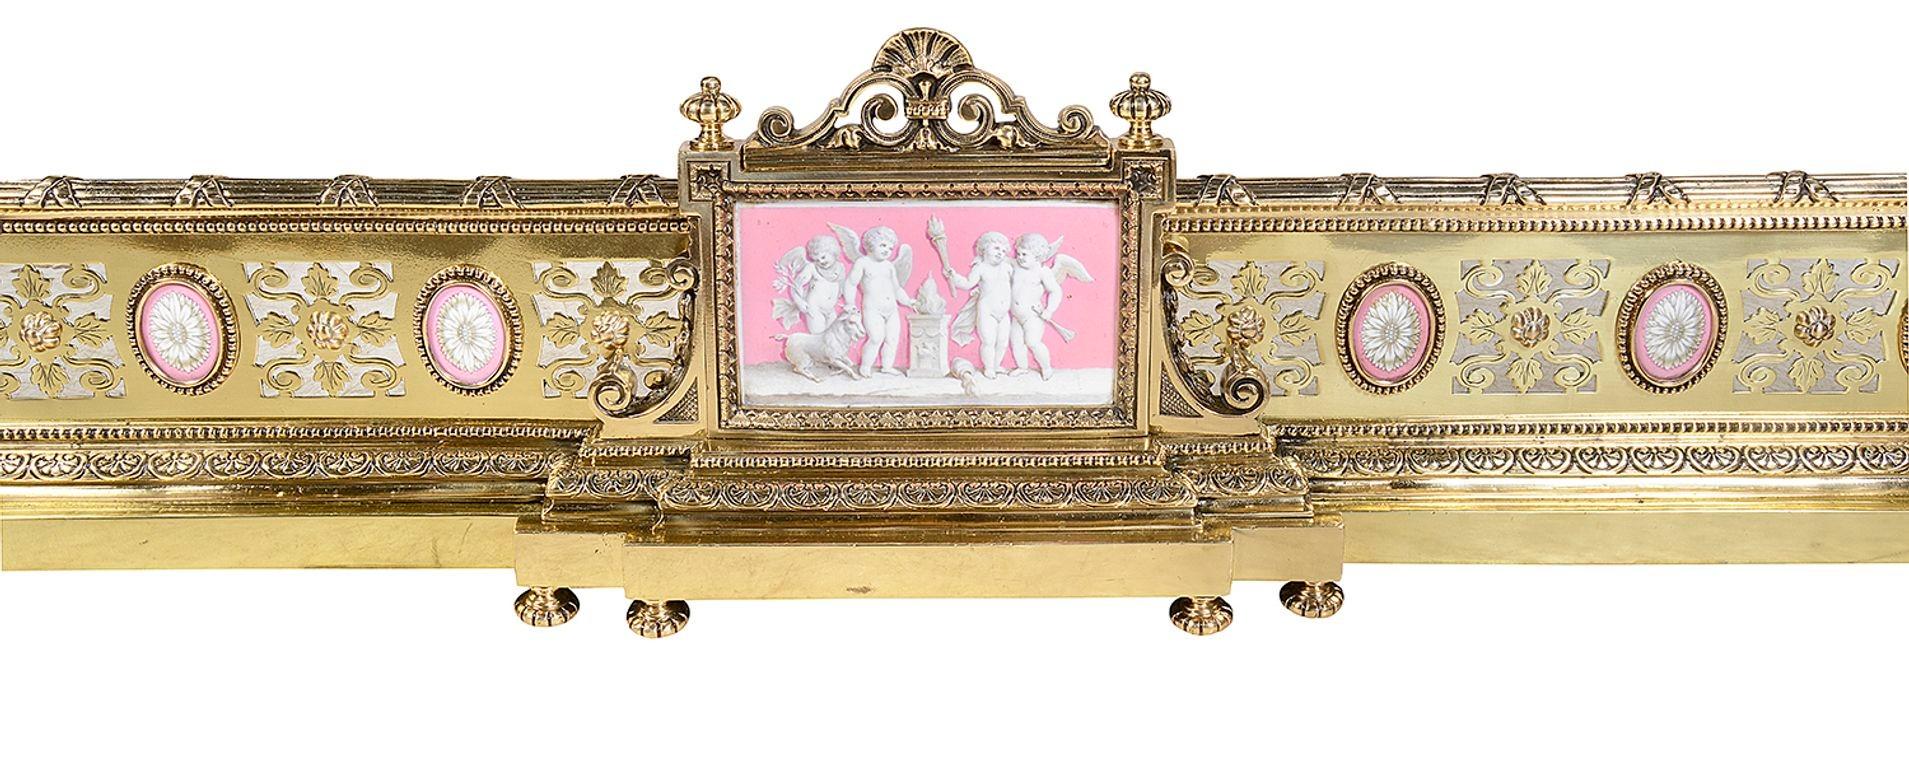 A rare fine quality French gilded ormolu fender, having classical pierced and engraved scrolling patterns, mouldings with motif and ribbon decoration. Inset pink porcelain Sevres style plaques with motifs and the central panel depicting frolicking